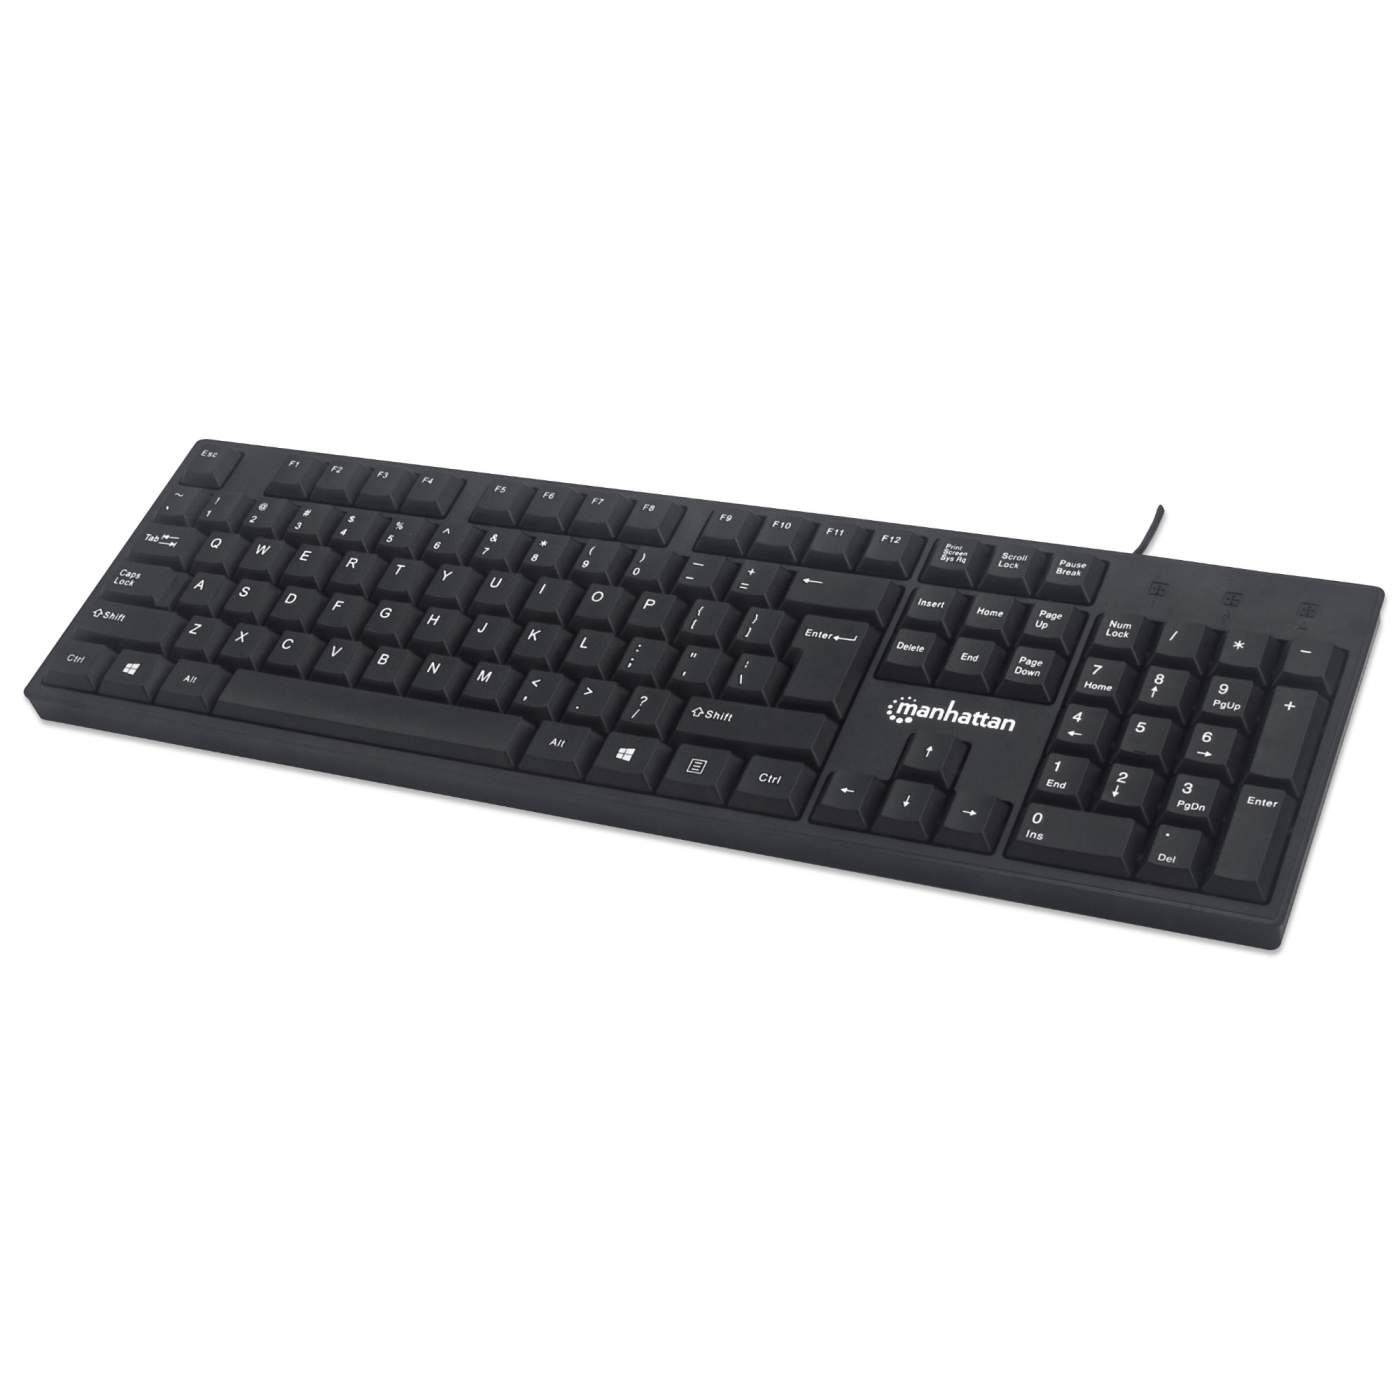 USB PC Keyboard, Quantity, Size, 30, or 90-Pack, 3-Year-Warranty – Maintechconnect.com